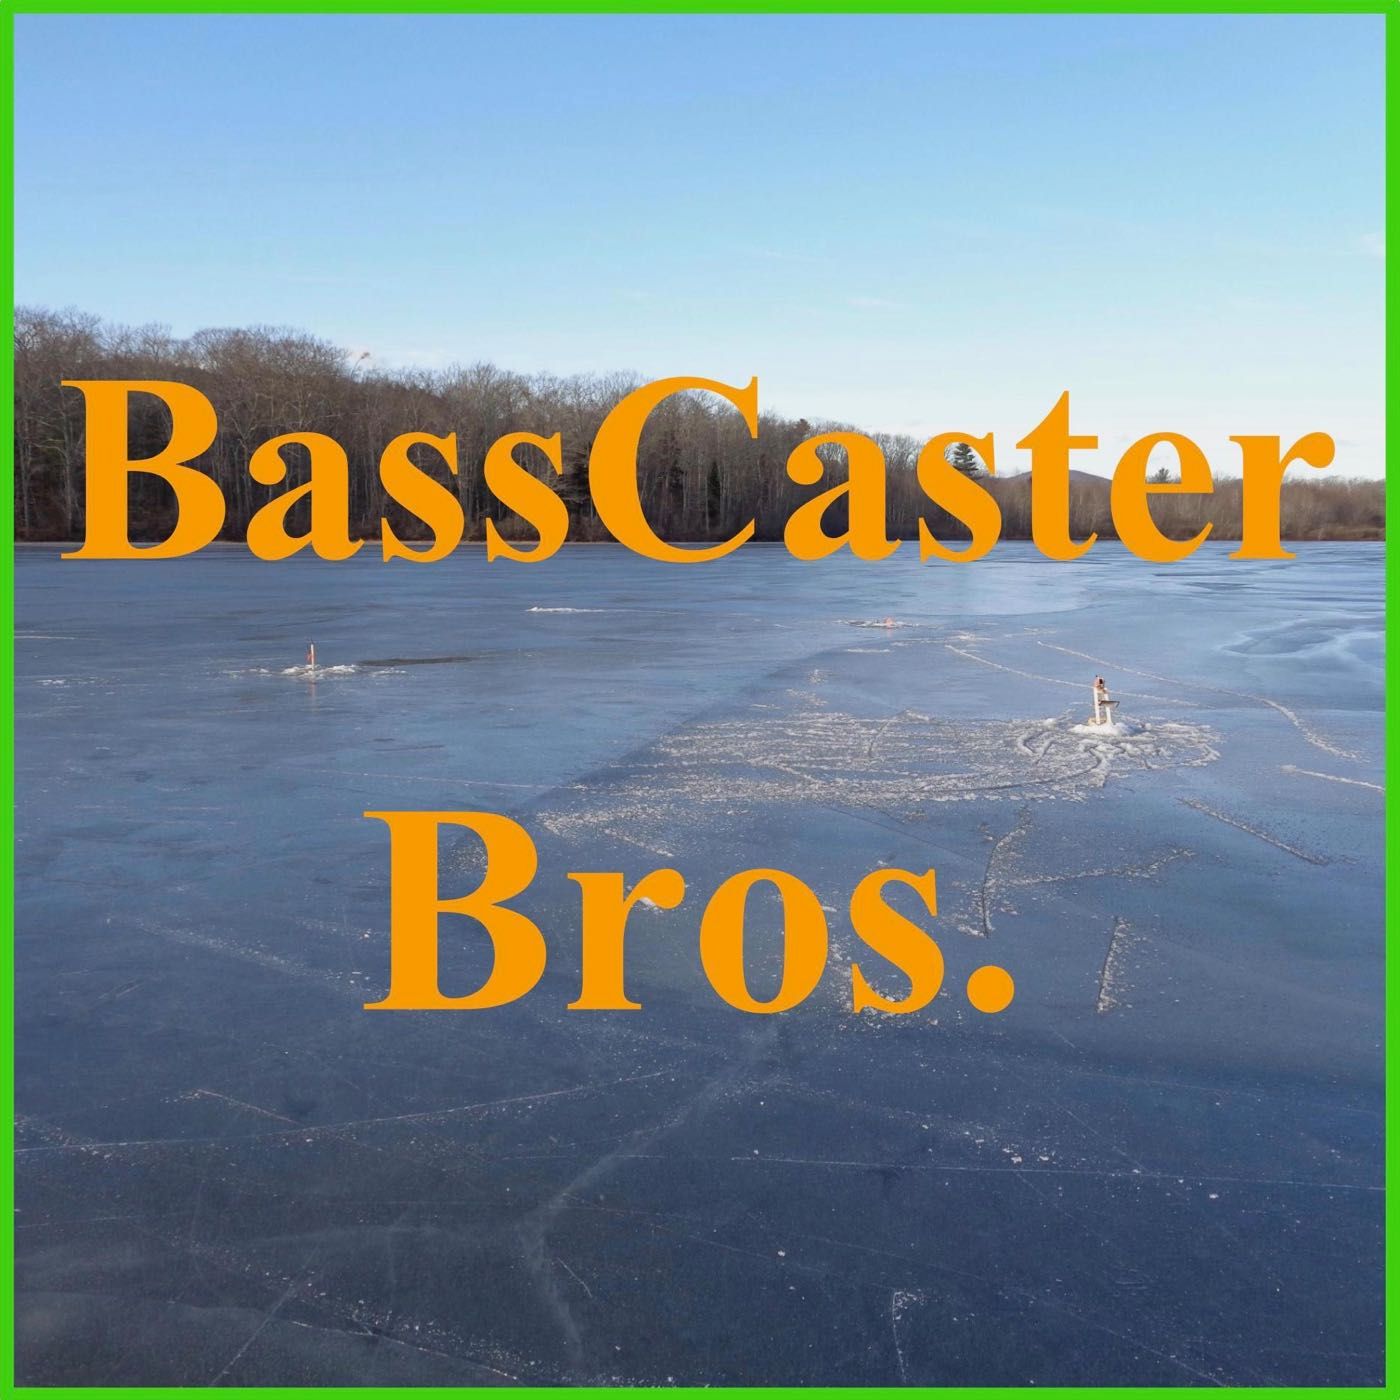 BassCaster Bros. A Bass Fishing Podcast